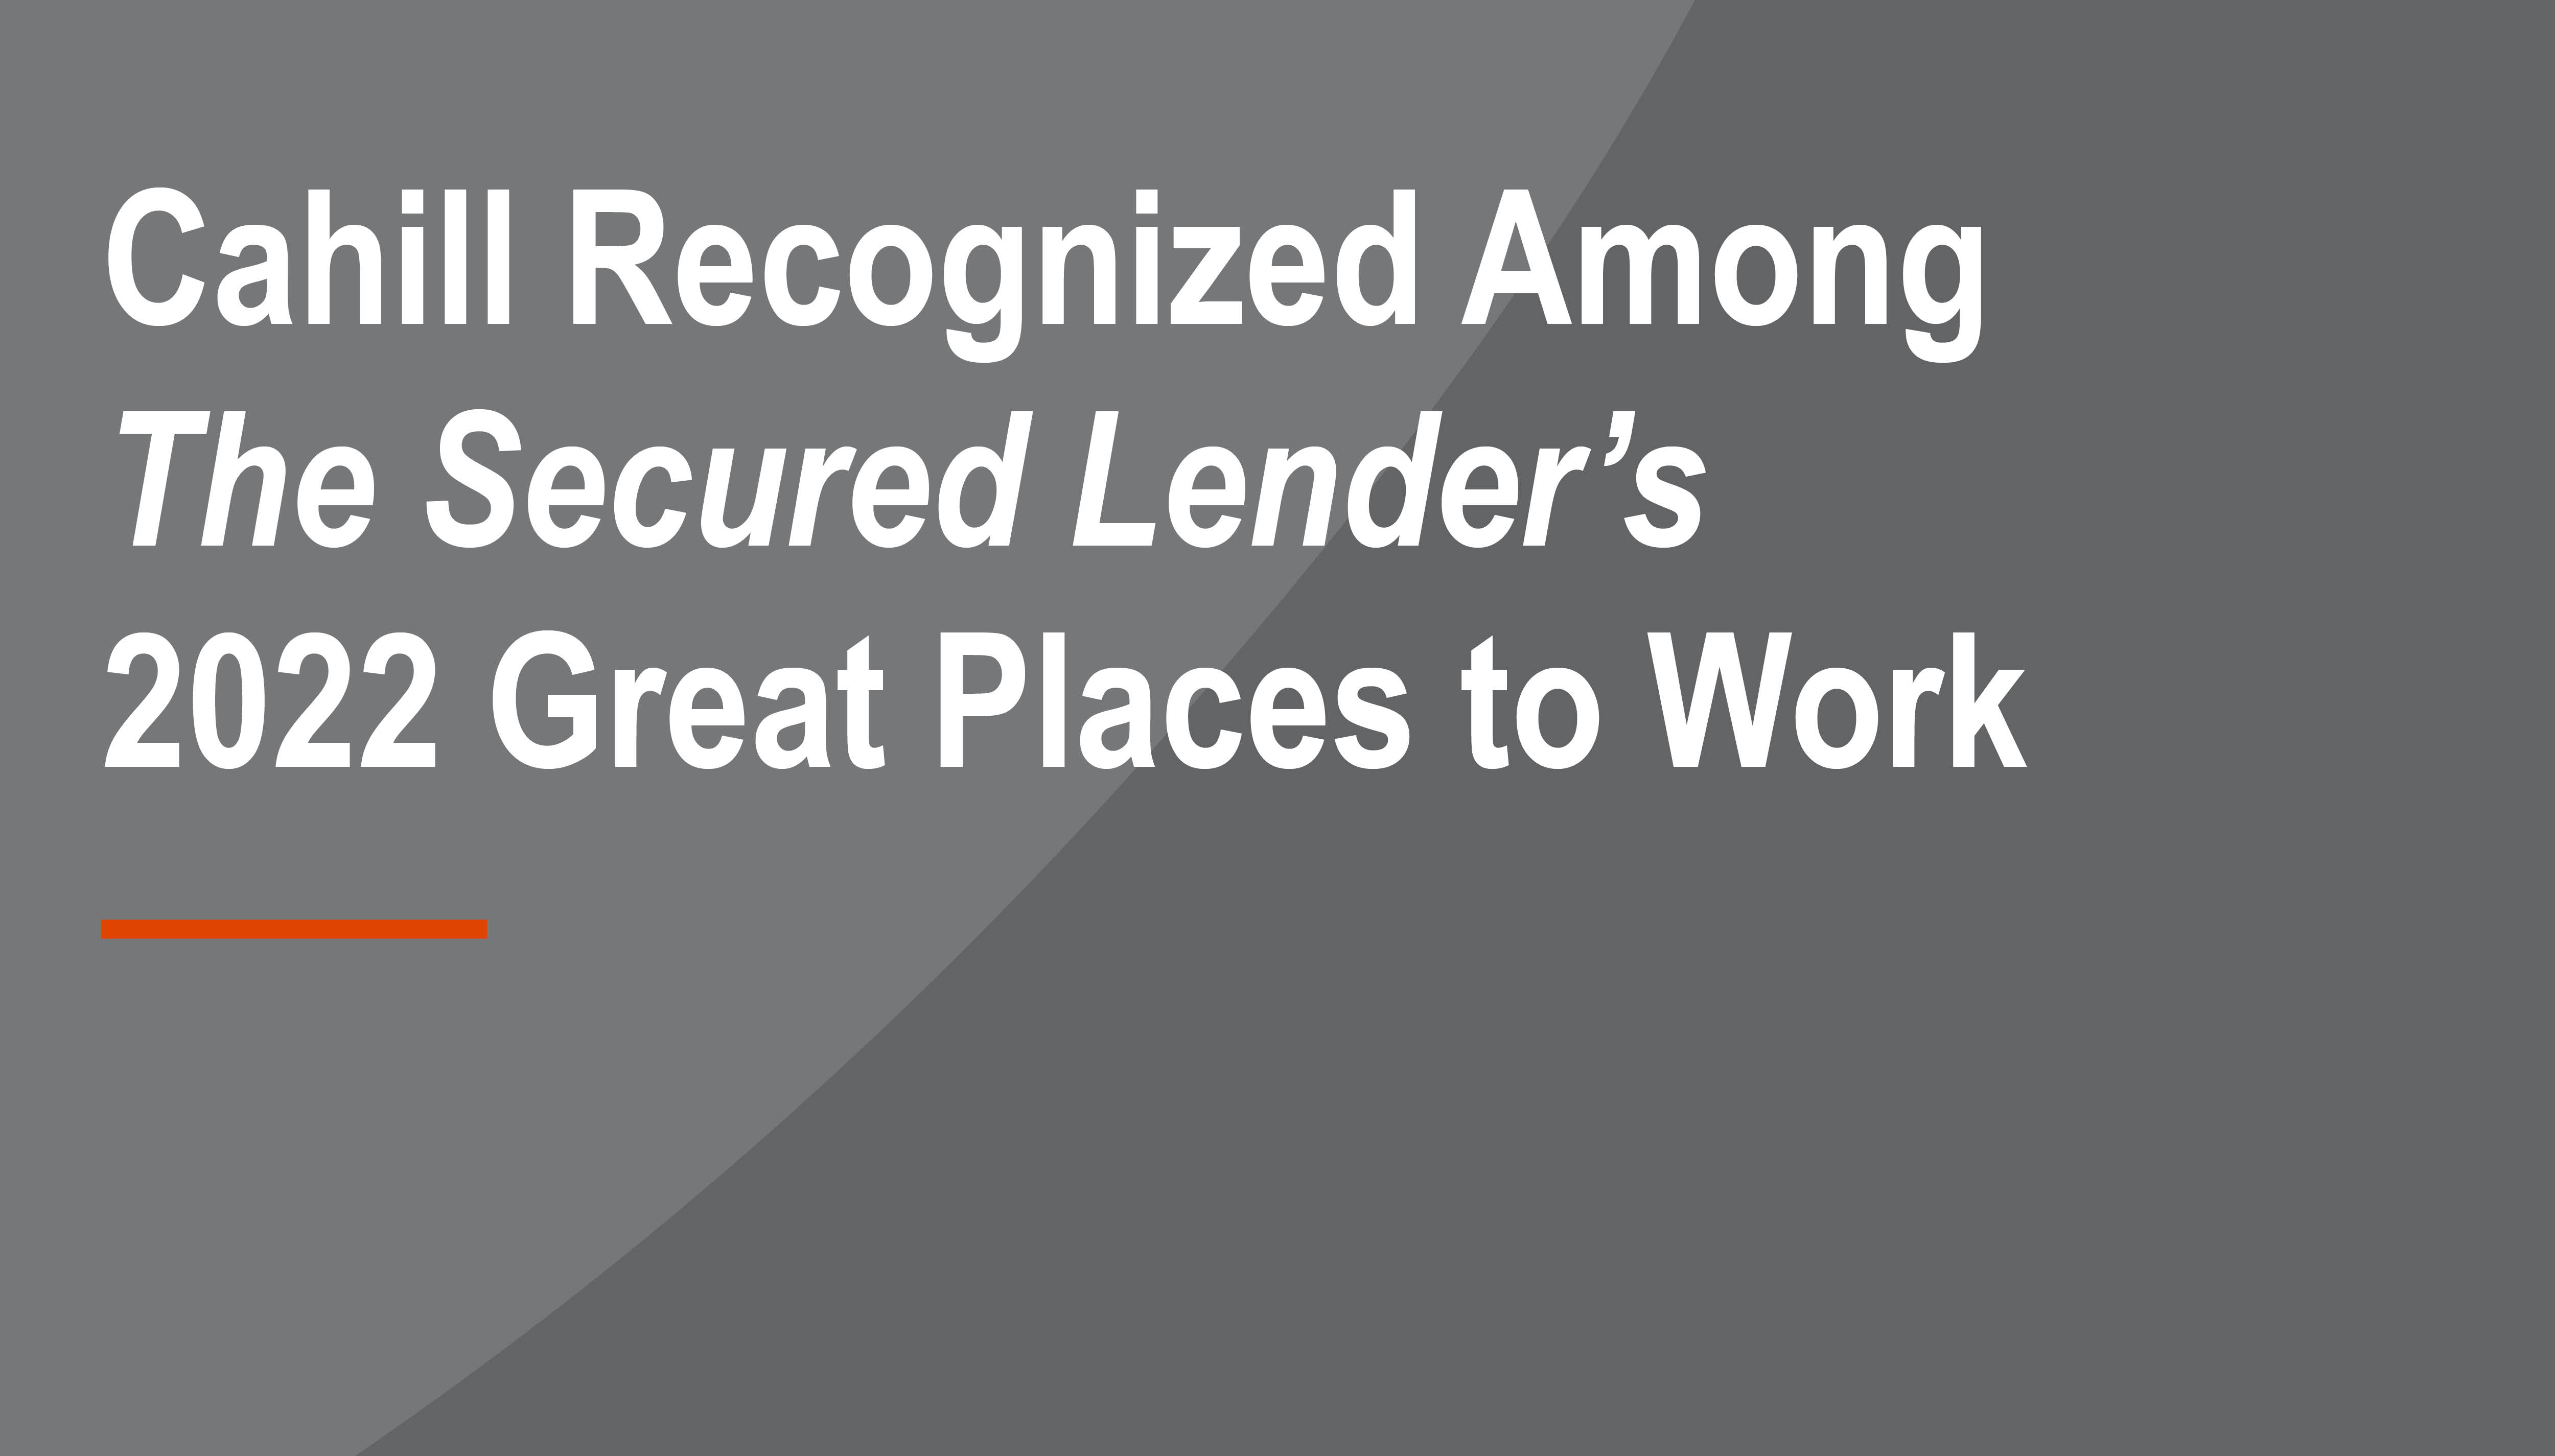 Secured-Lender_2022-Great-Places-to-Work_Scroll.jpg